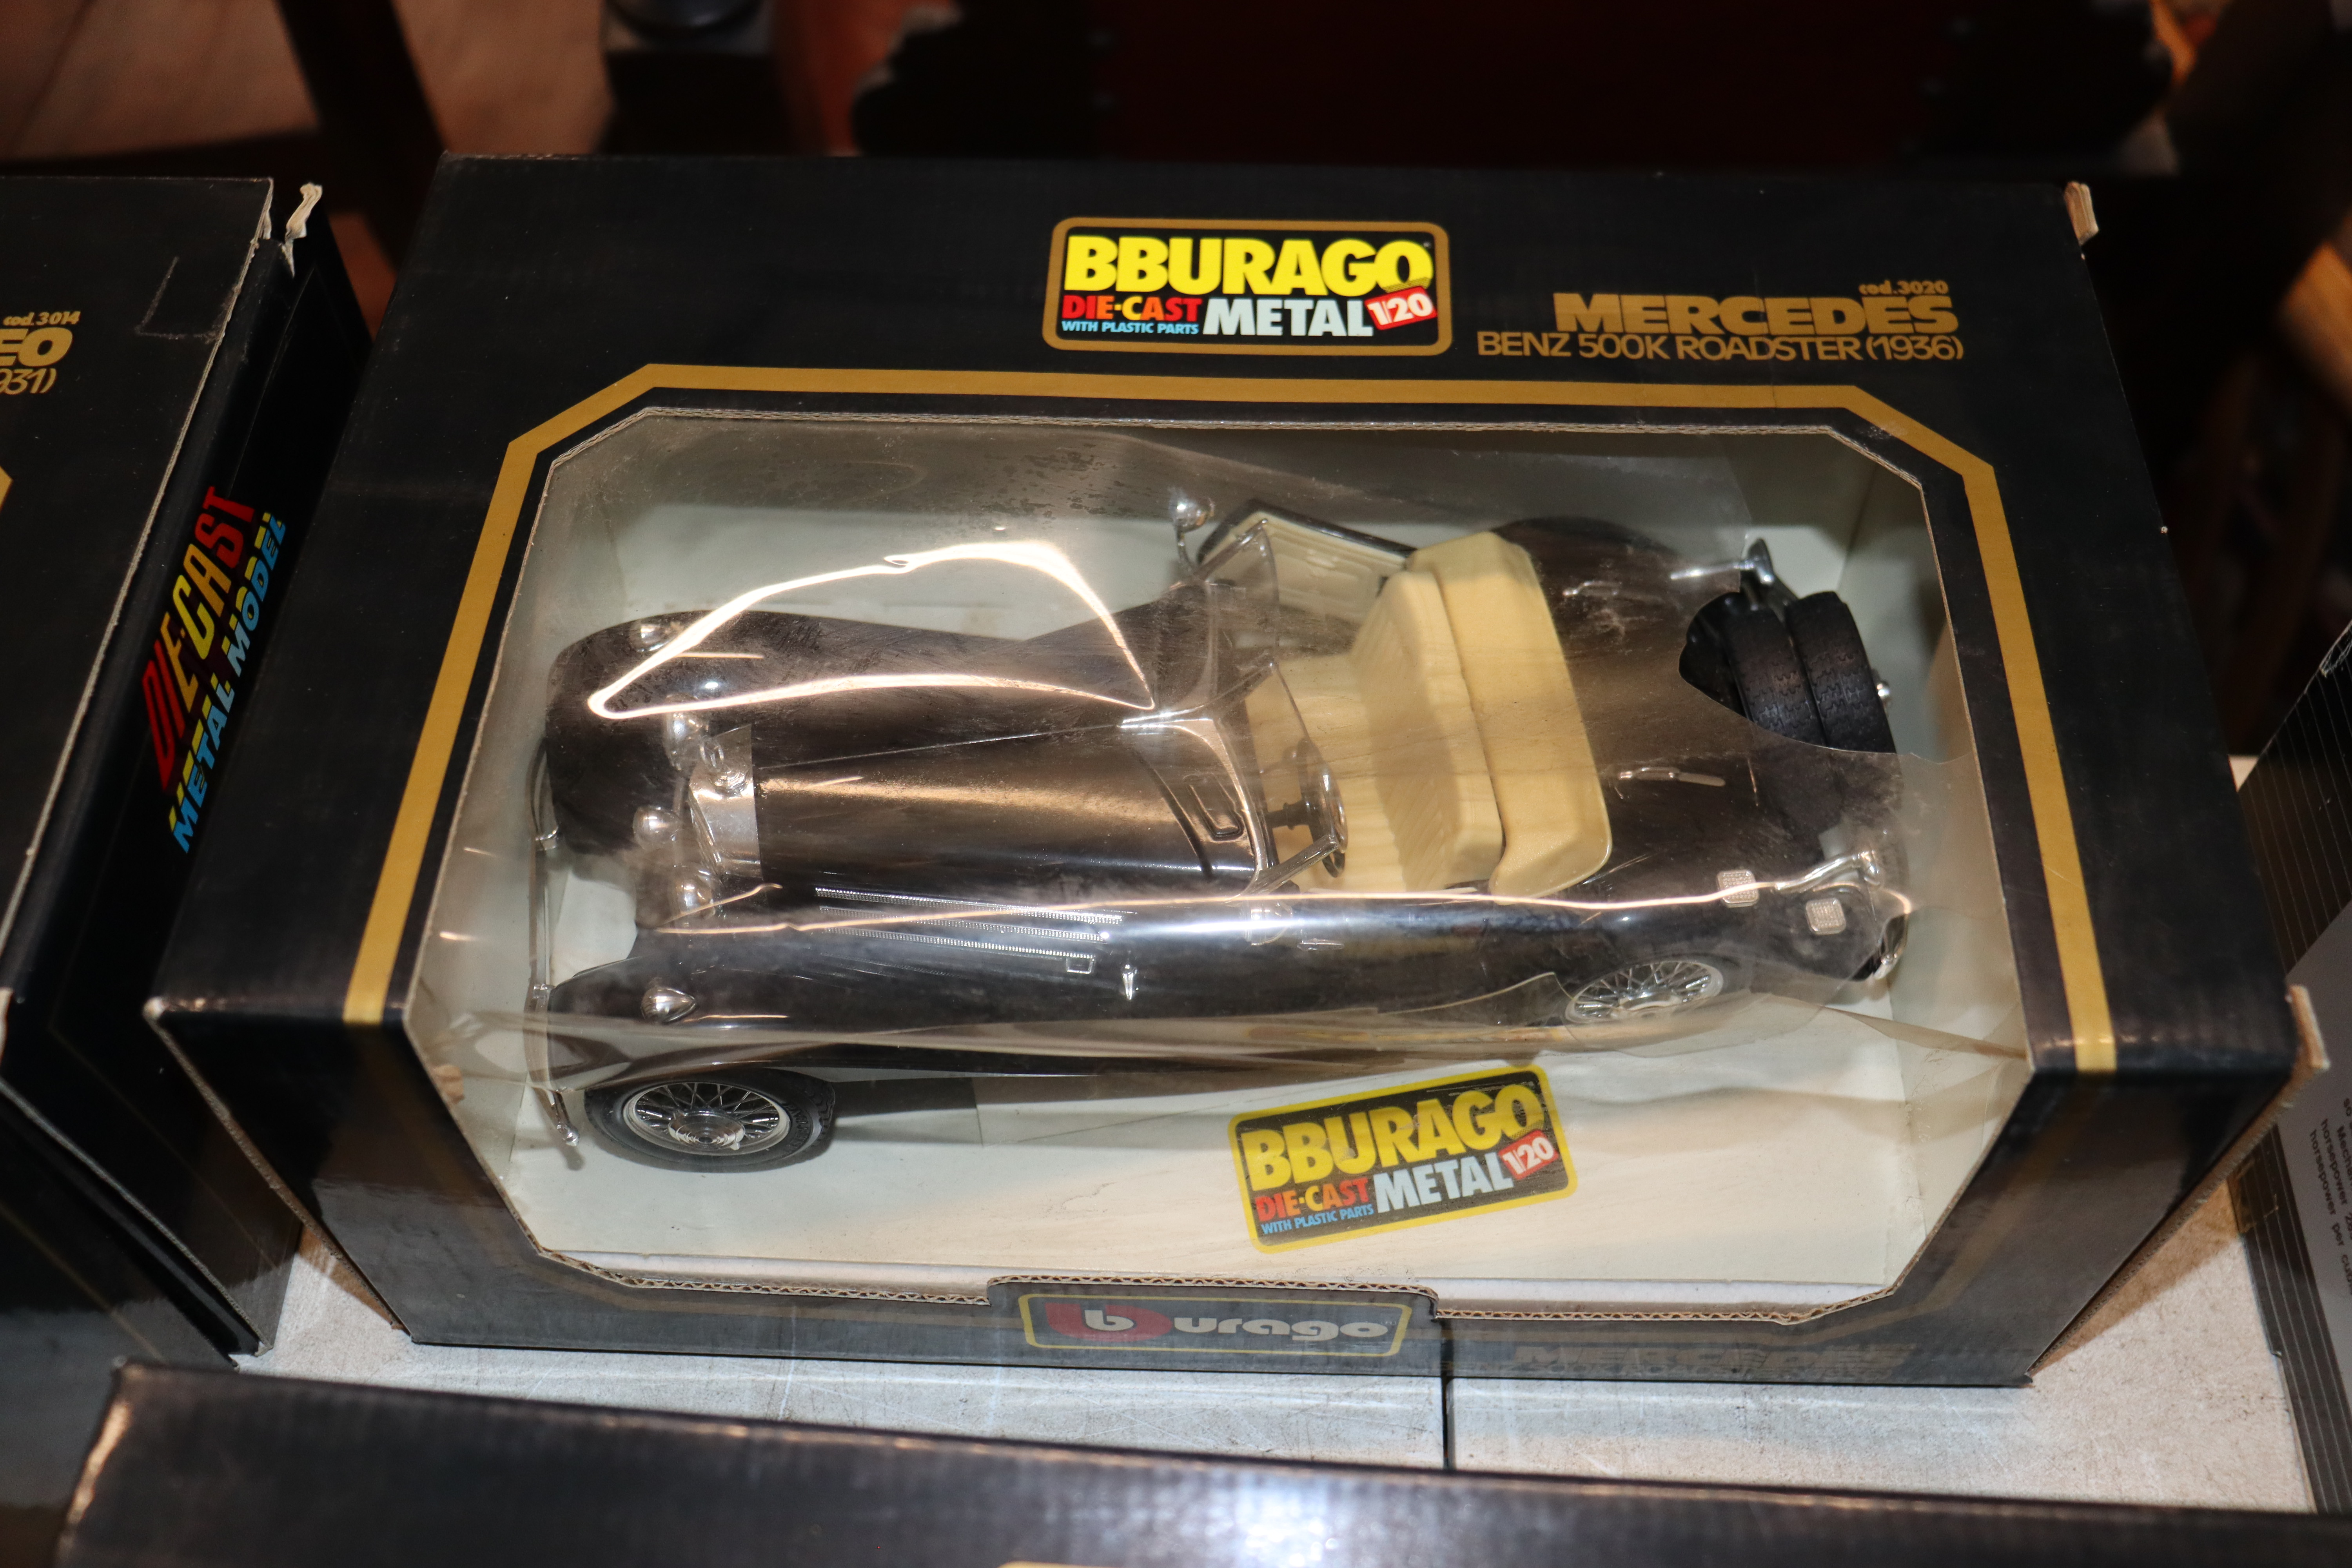 B. Burago boxed Mercedes Benz 500K Roadster; boxed - Image 4 of 4